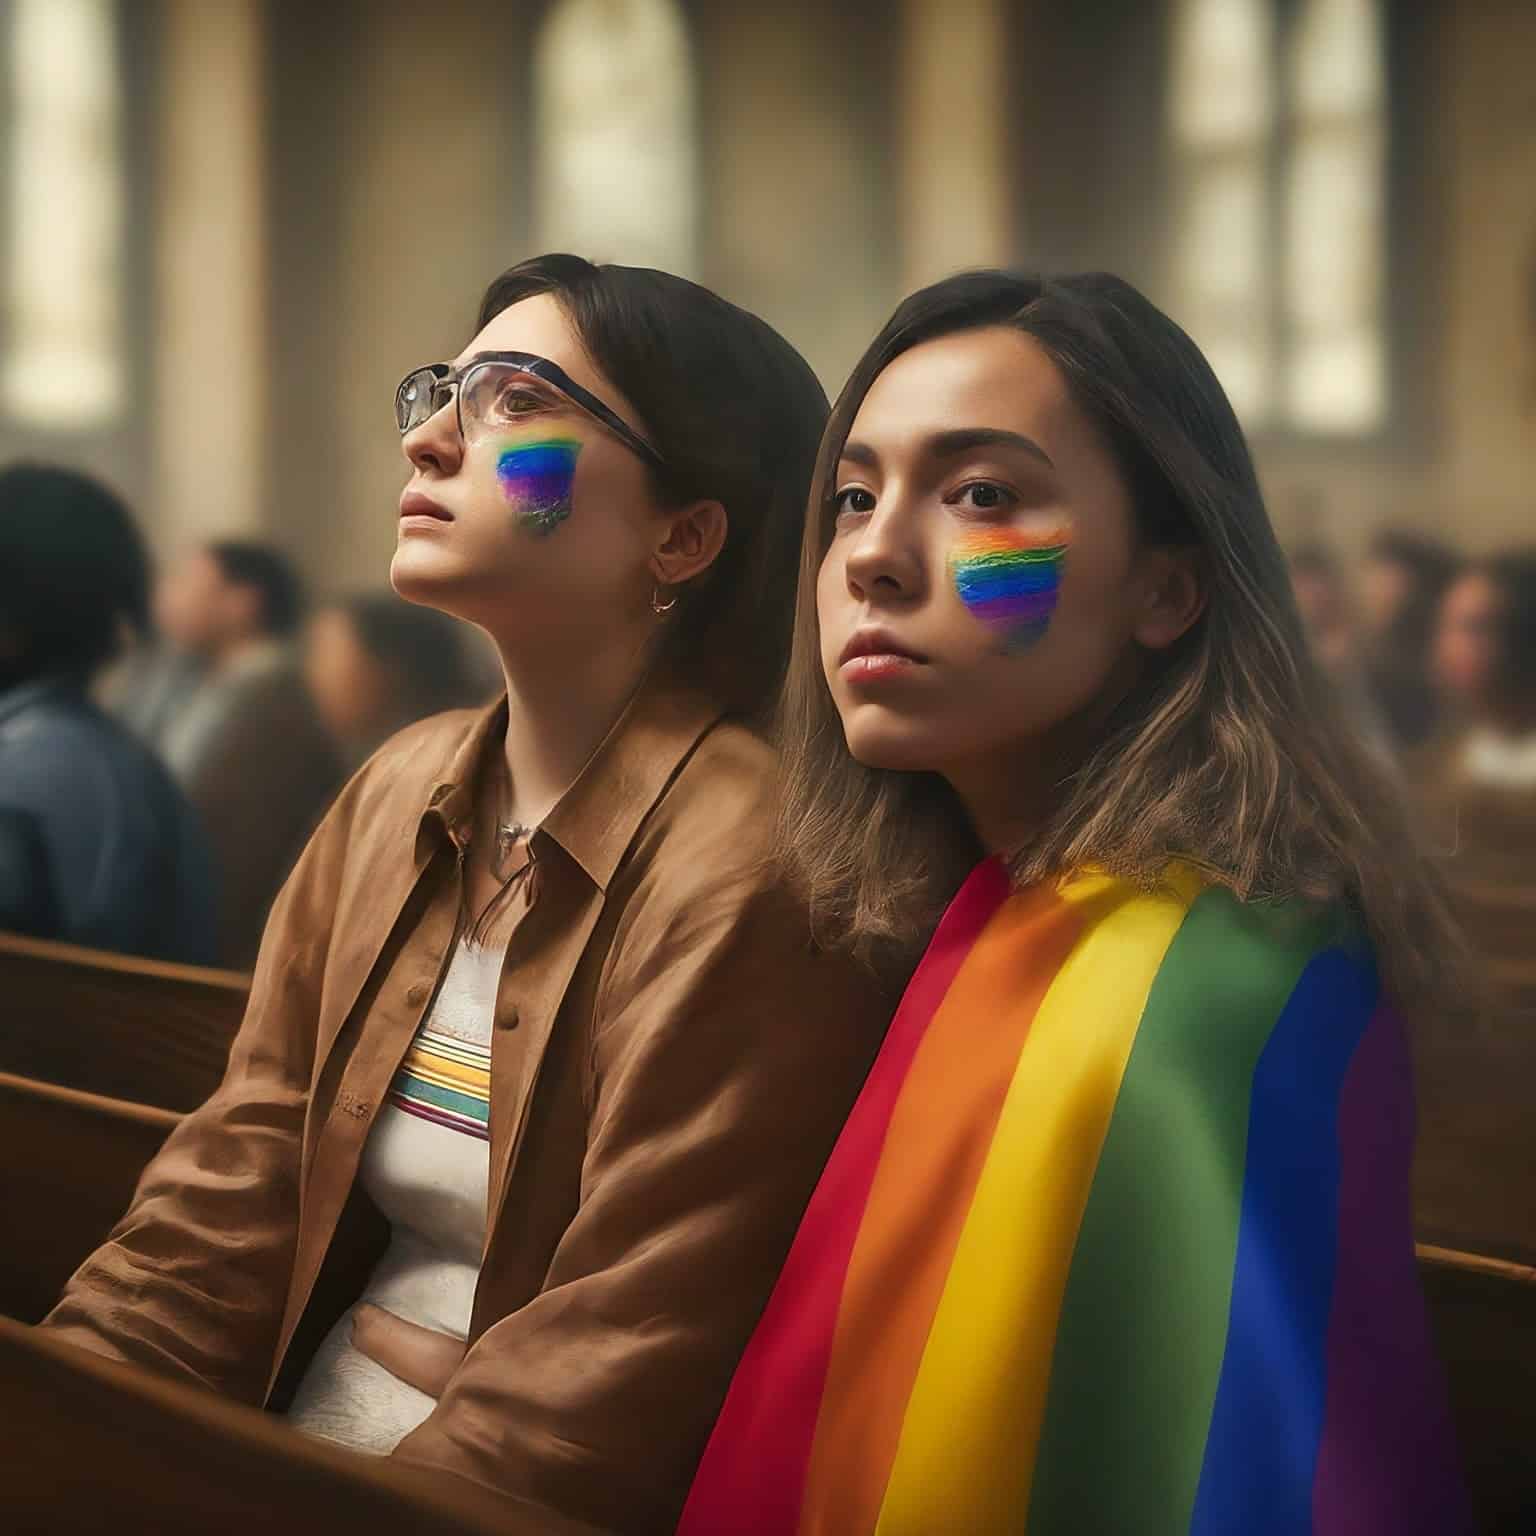 The Churches are sleeping: When did ‘Woke’ Pulpits become the new normal?